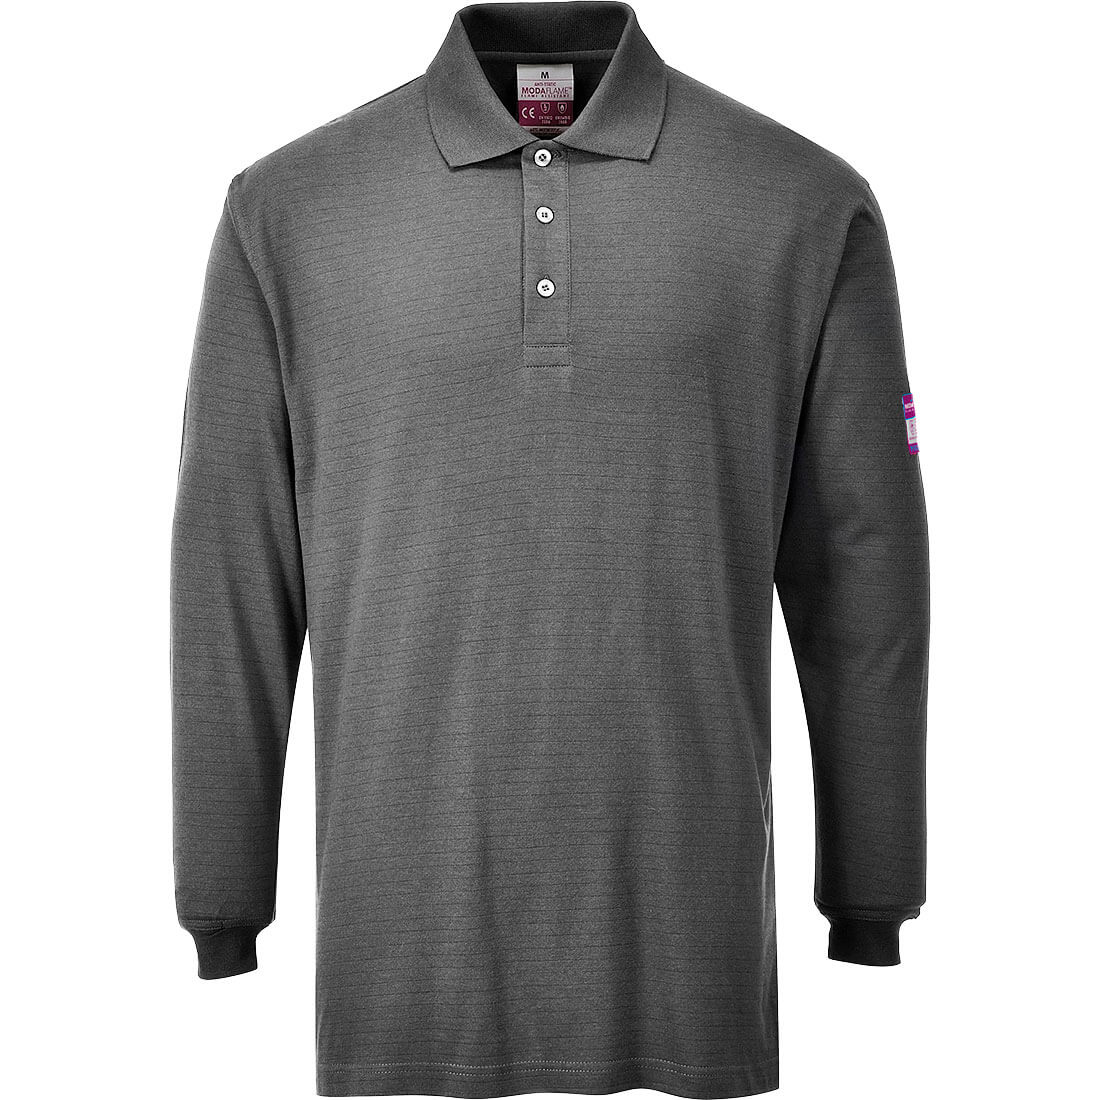 Image of Modaflame Mens Flame Resistant Antistatic Long Sleeve Polo Shirt Grey S